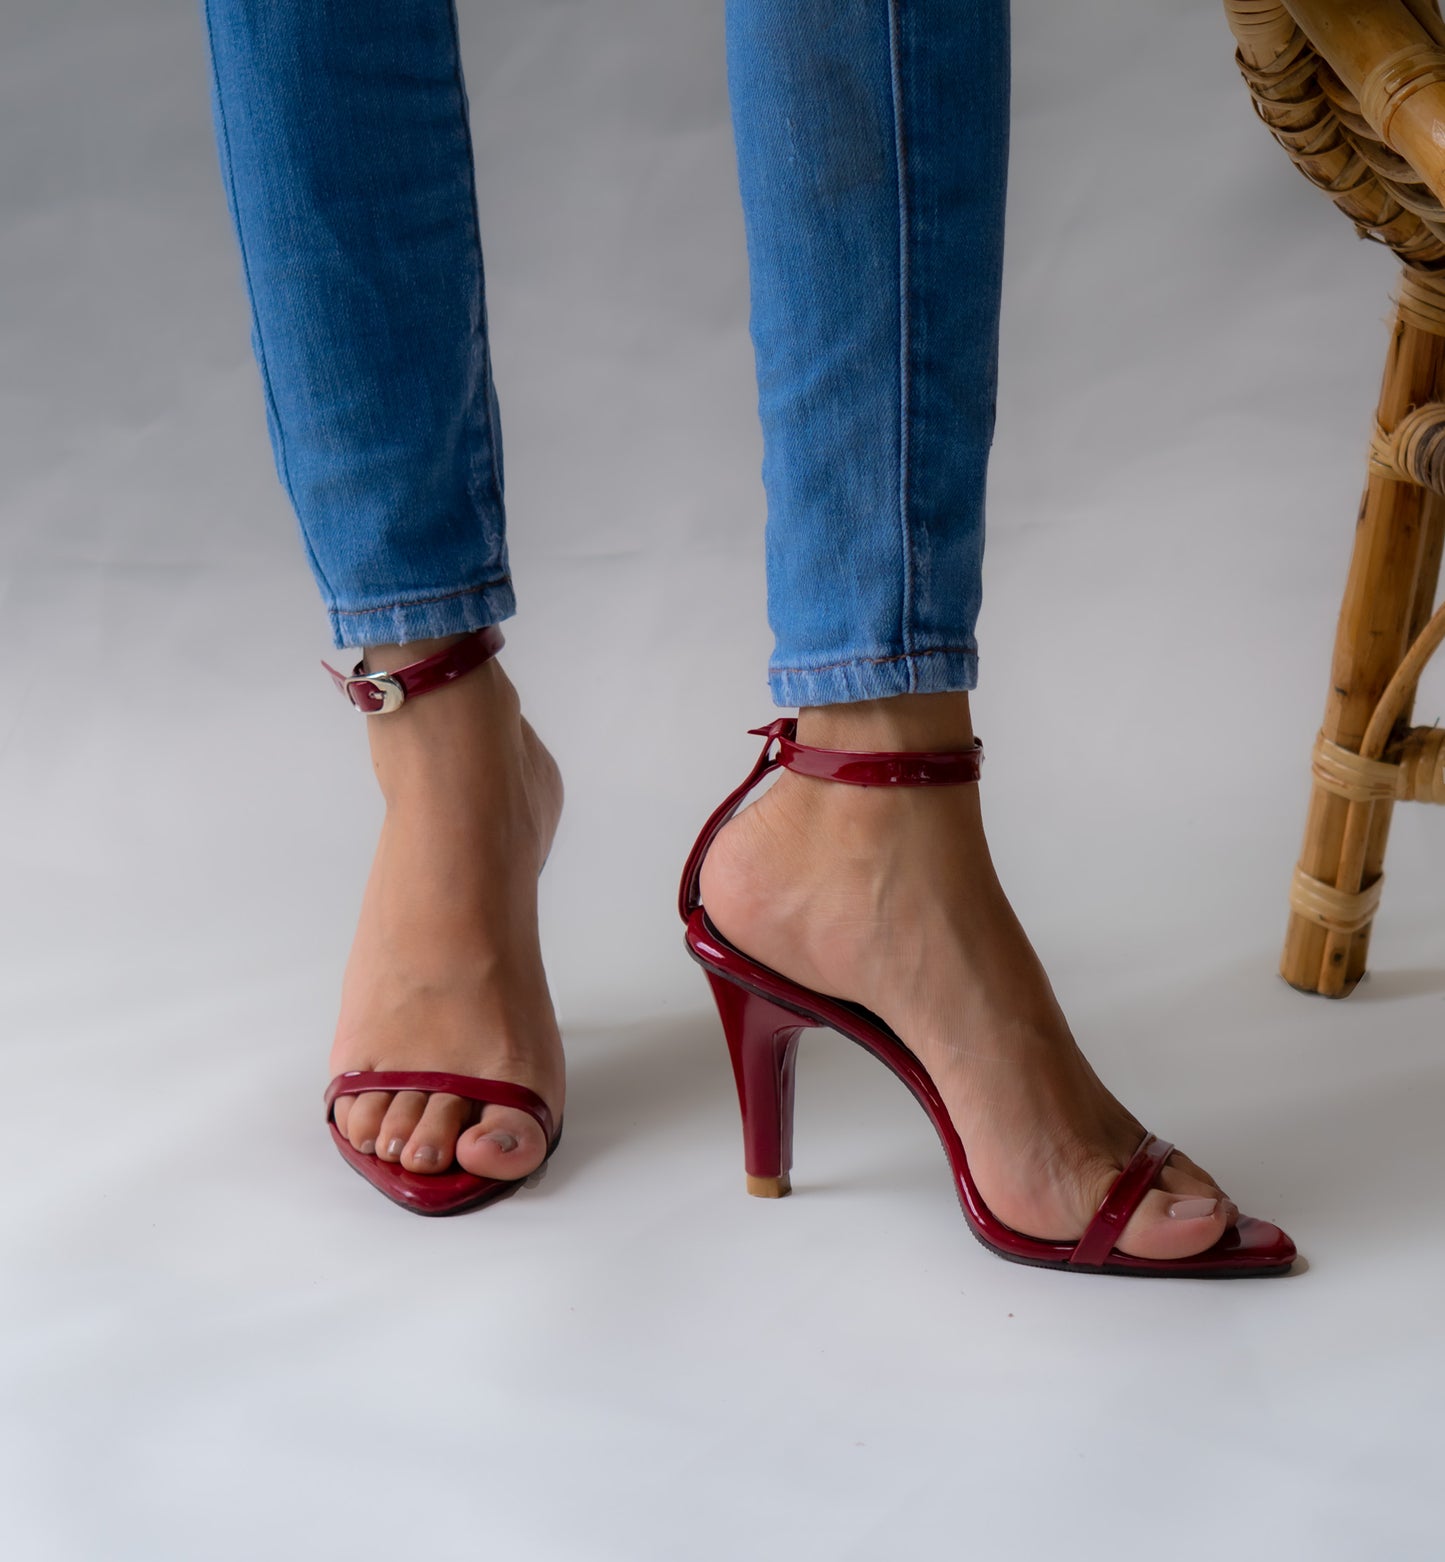 Elegant maroon heel featuring a sophisticated 3-inch lift